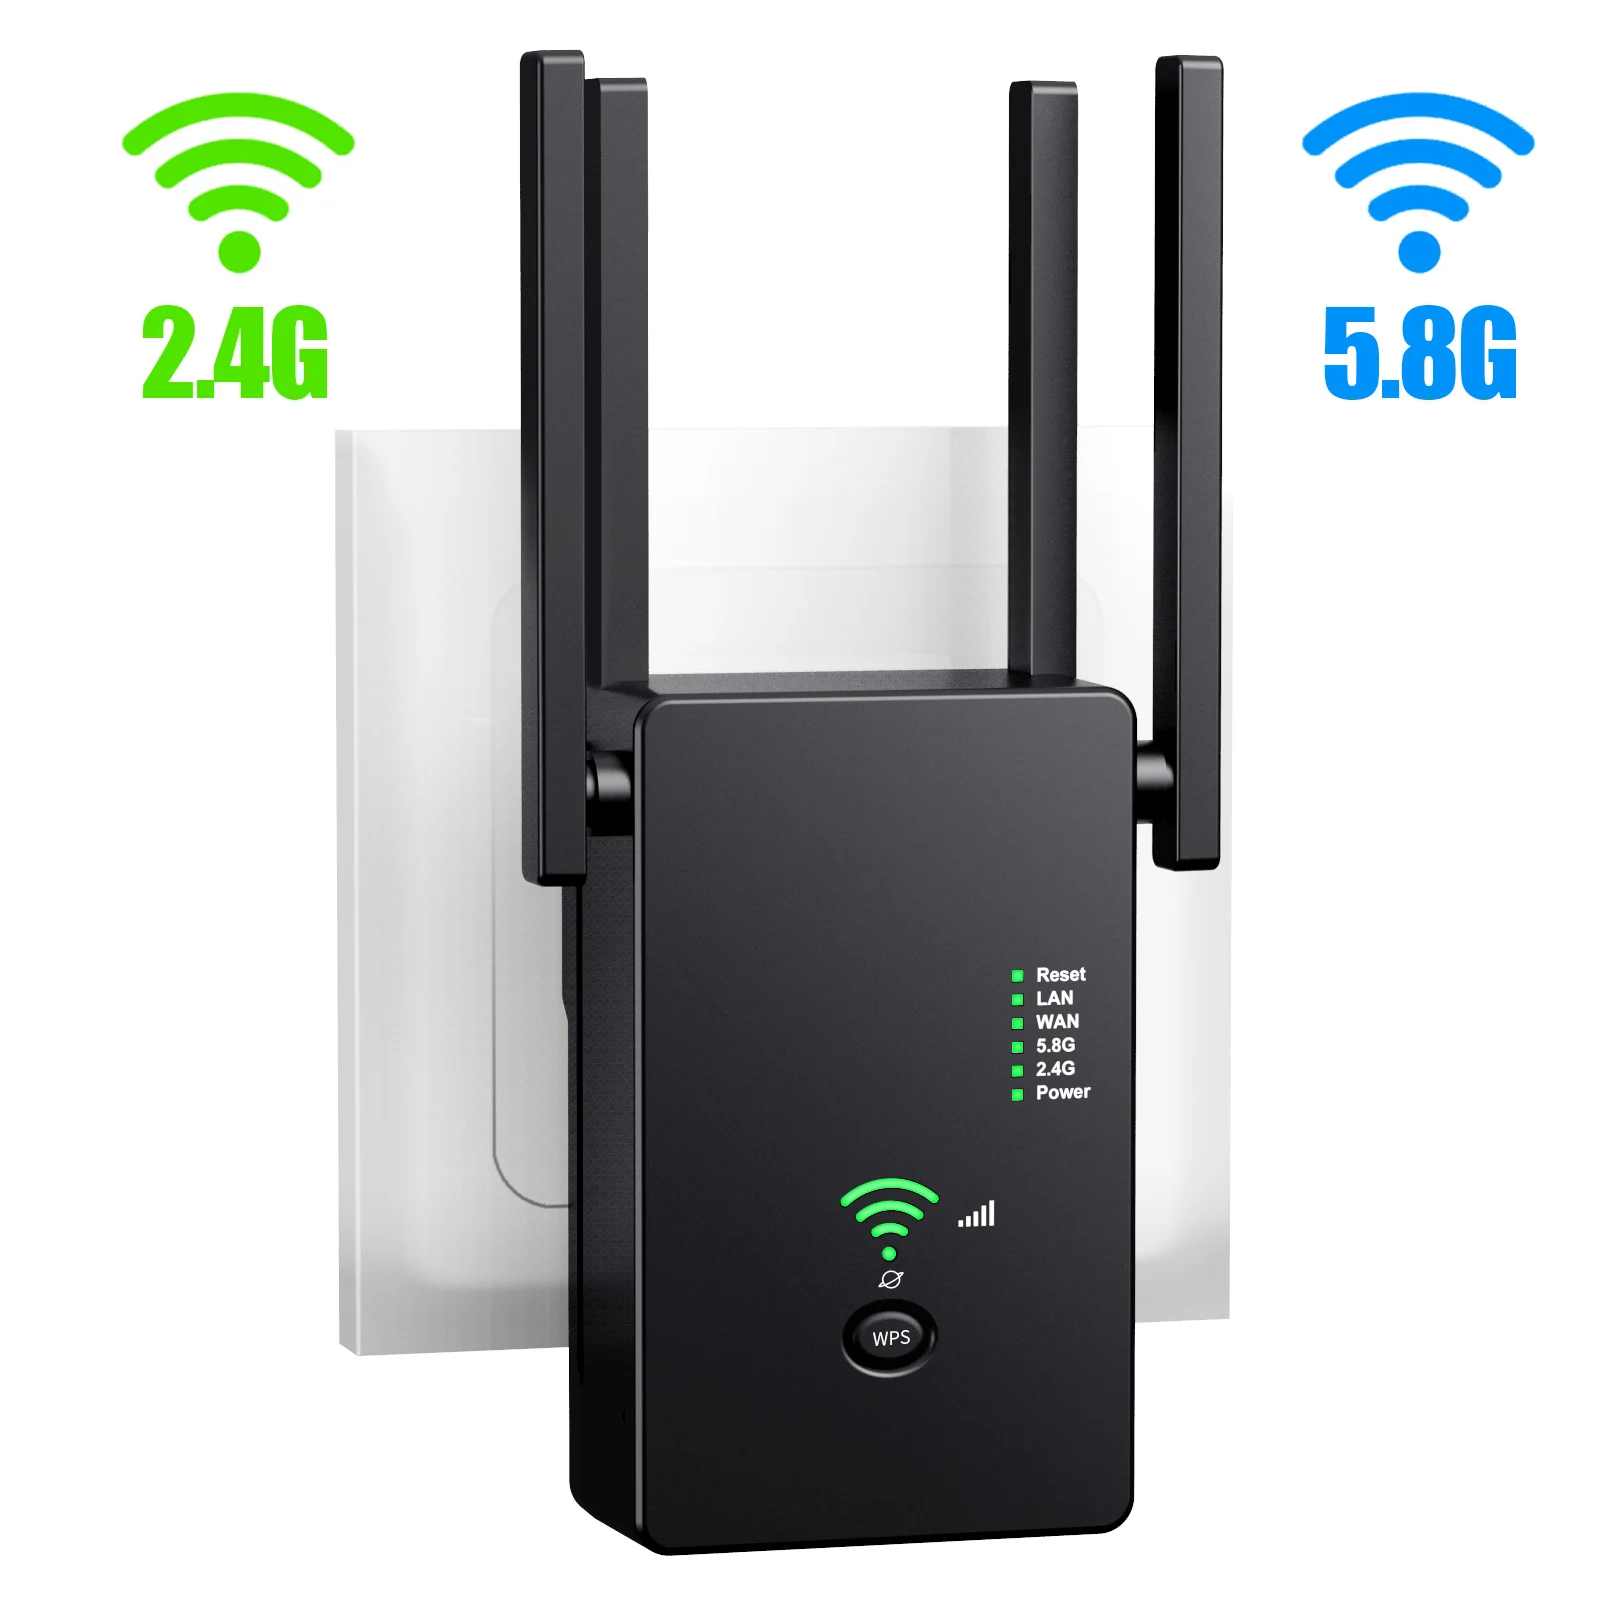 5Ghz Wireless WiFi Repeater 1200Mbps Router Wifi Booster 2.4G Long Range Extender 5G Wi-Fi Signal Amplifier Repeater Black/White